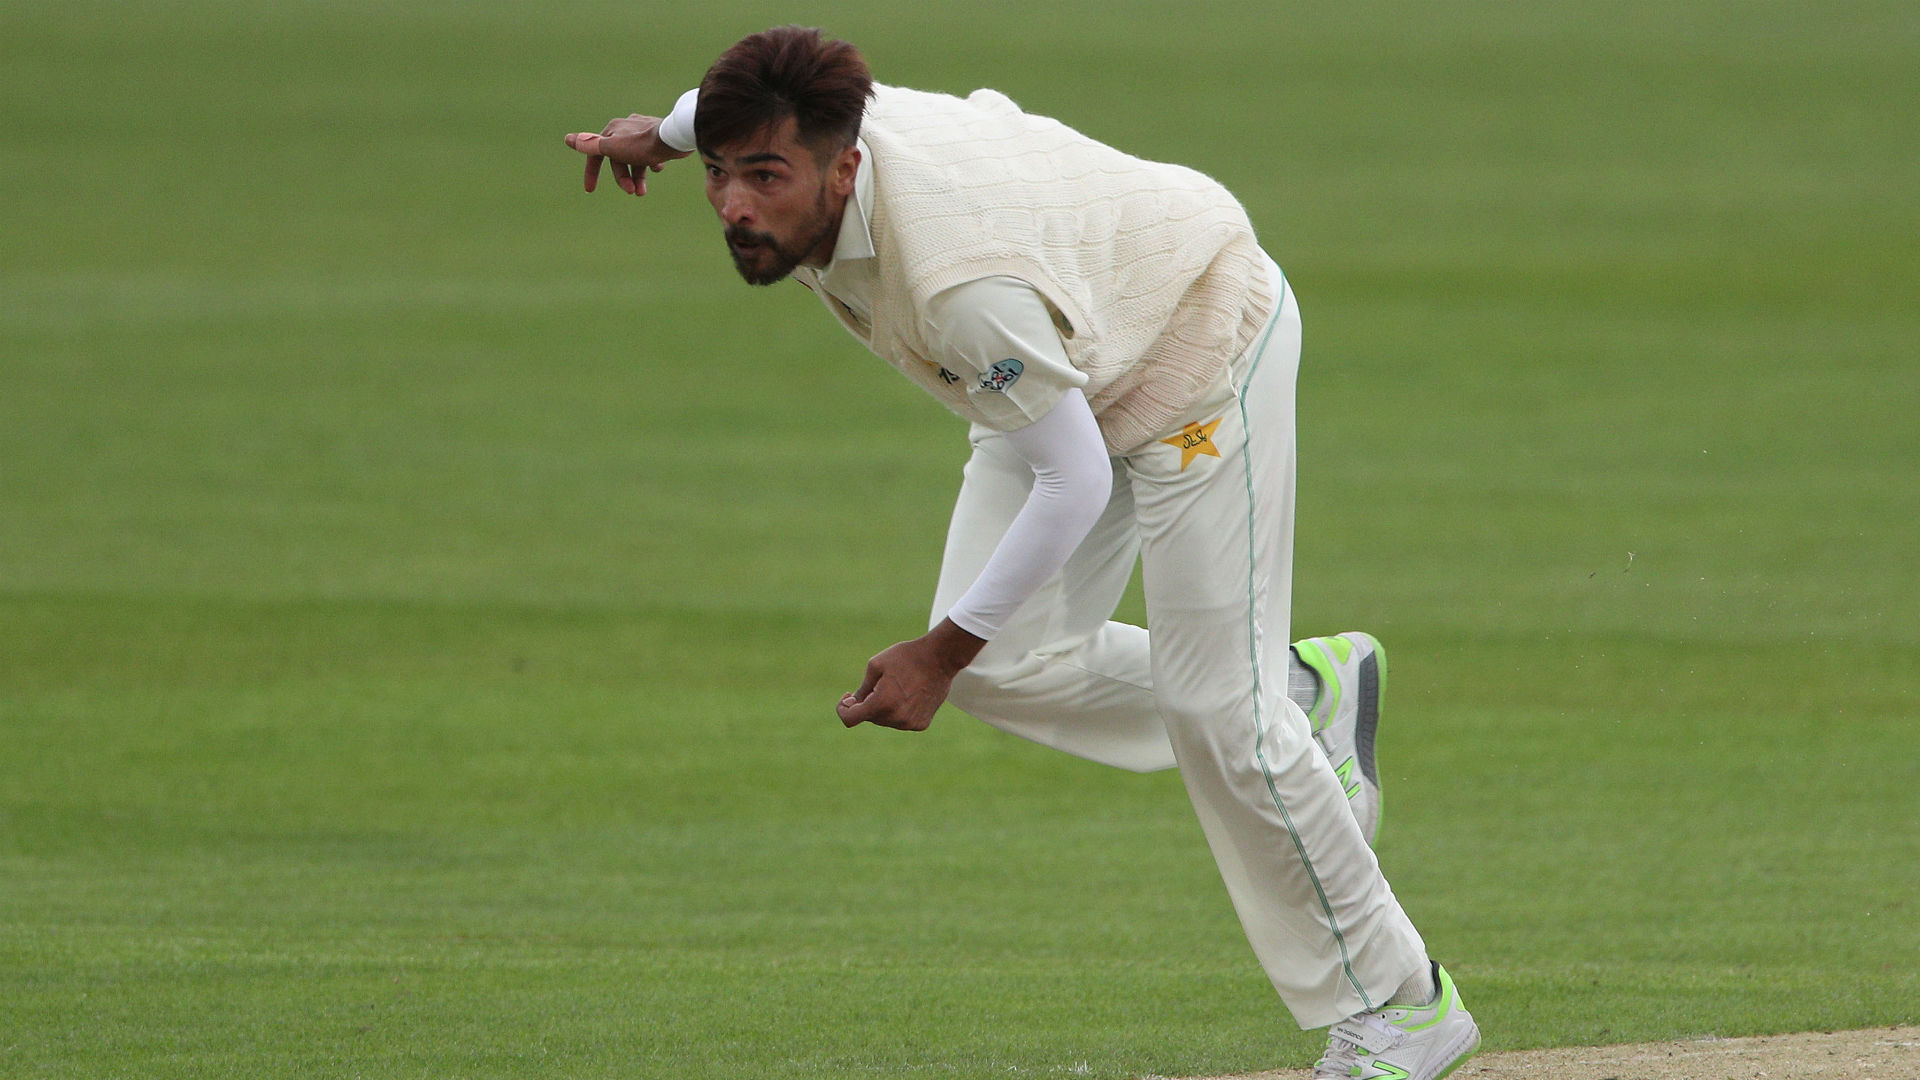 The injured Mohammad Abbas and Fakhar Zaman are included in Pakistan's Test squad, alongside Mohammad Amir, Shadab Khan and Mohammad Rizwan.